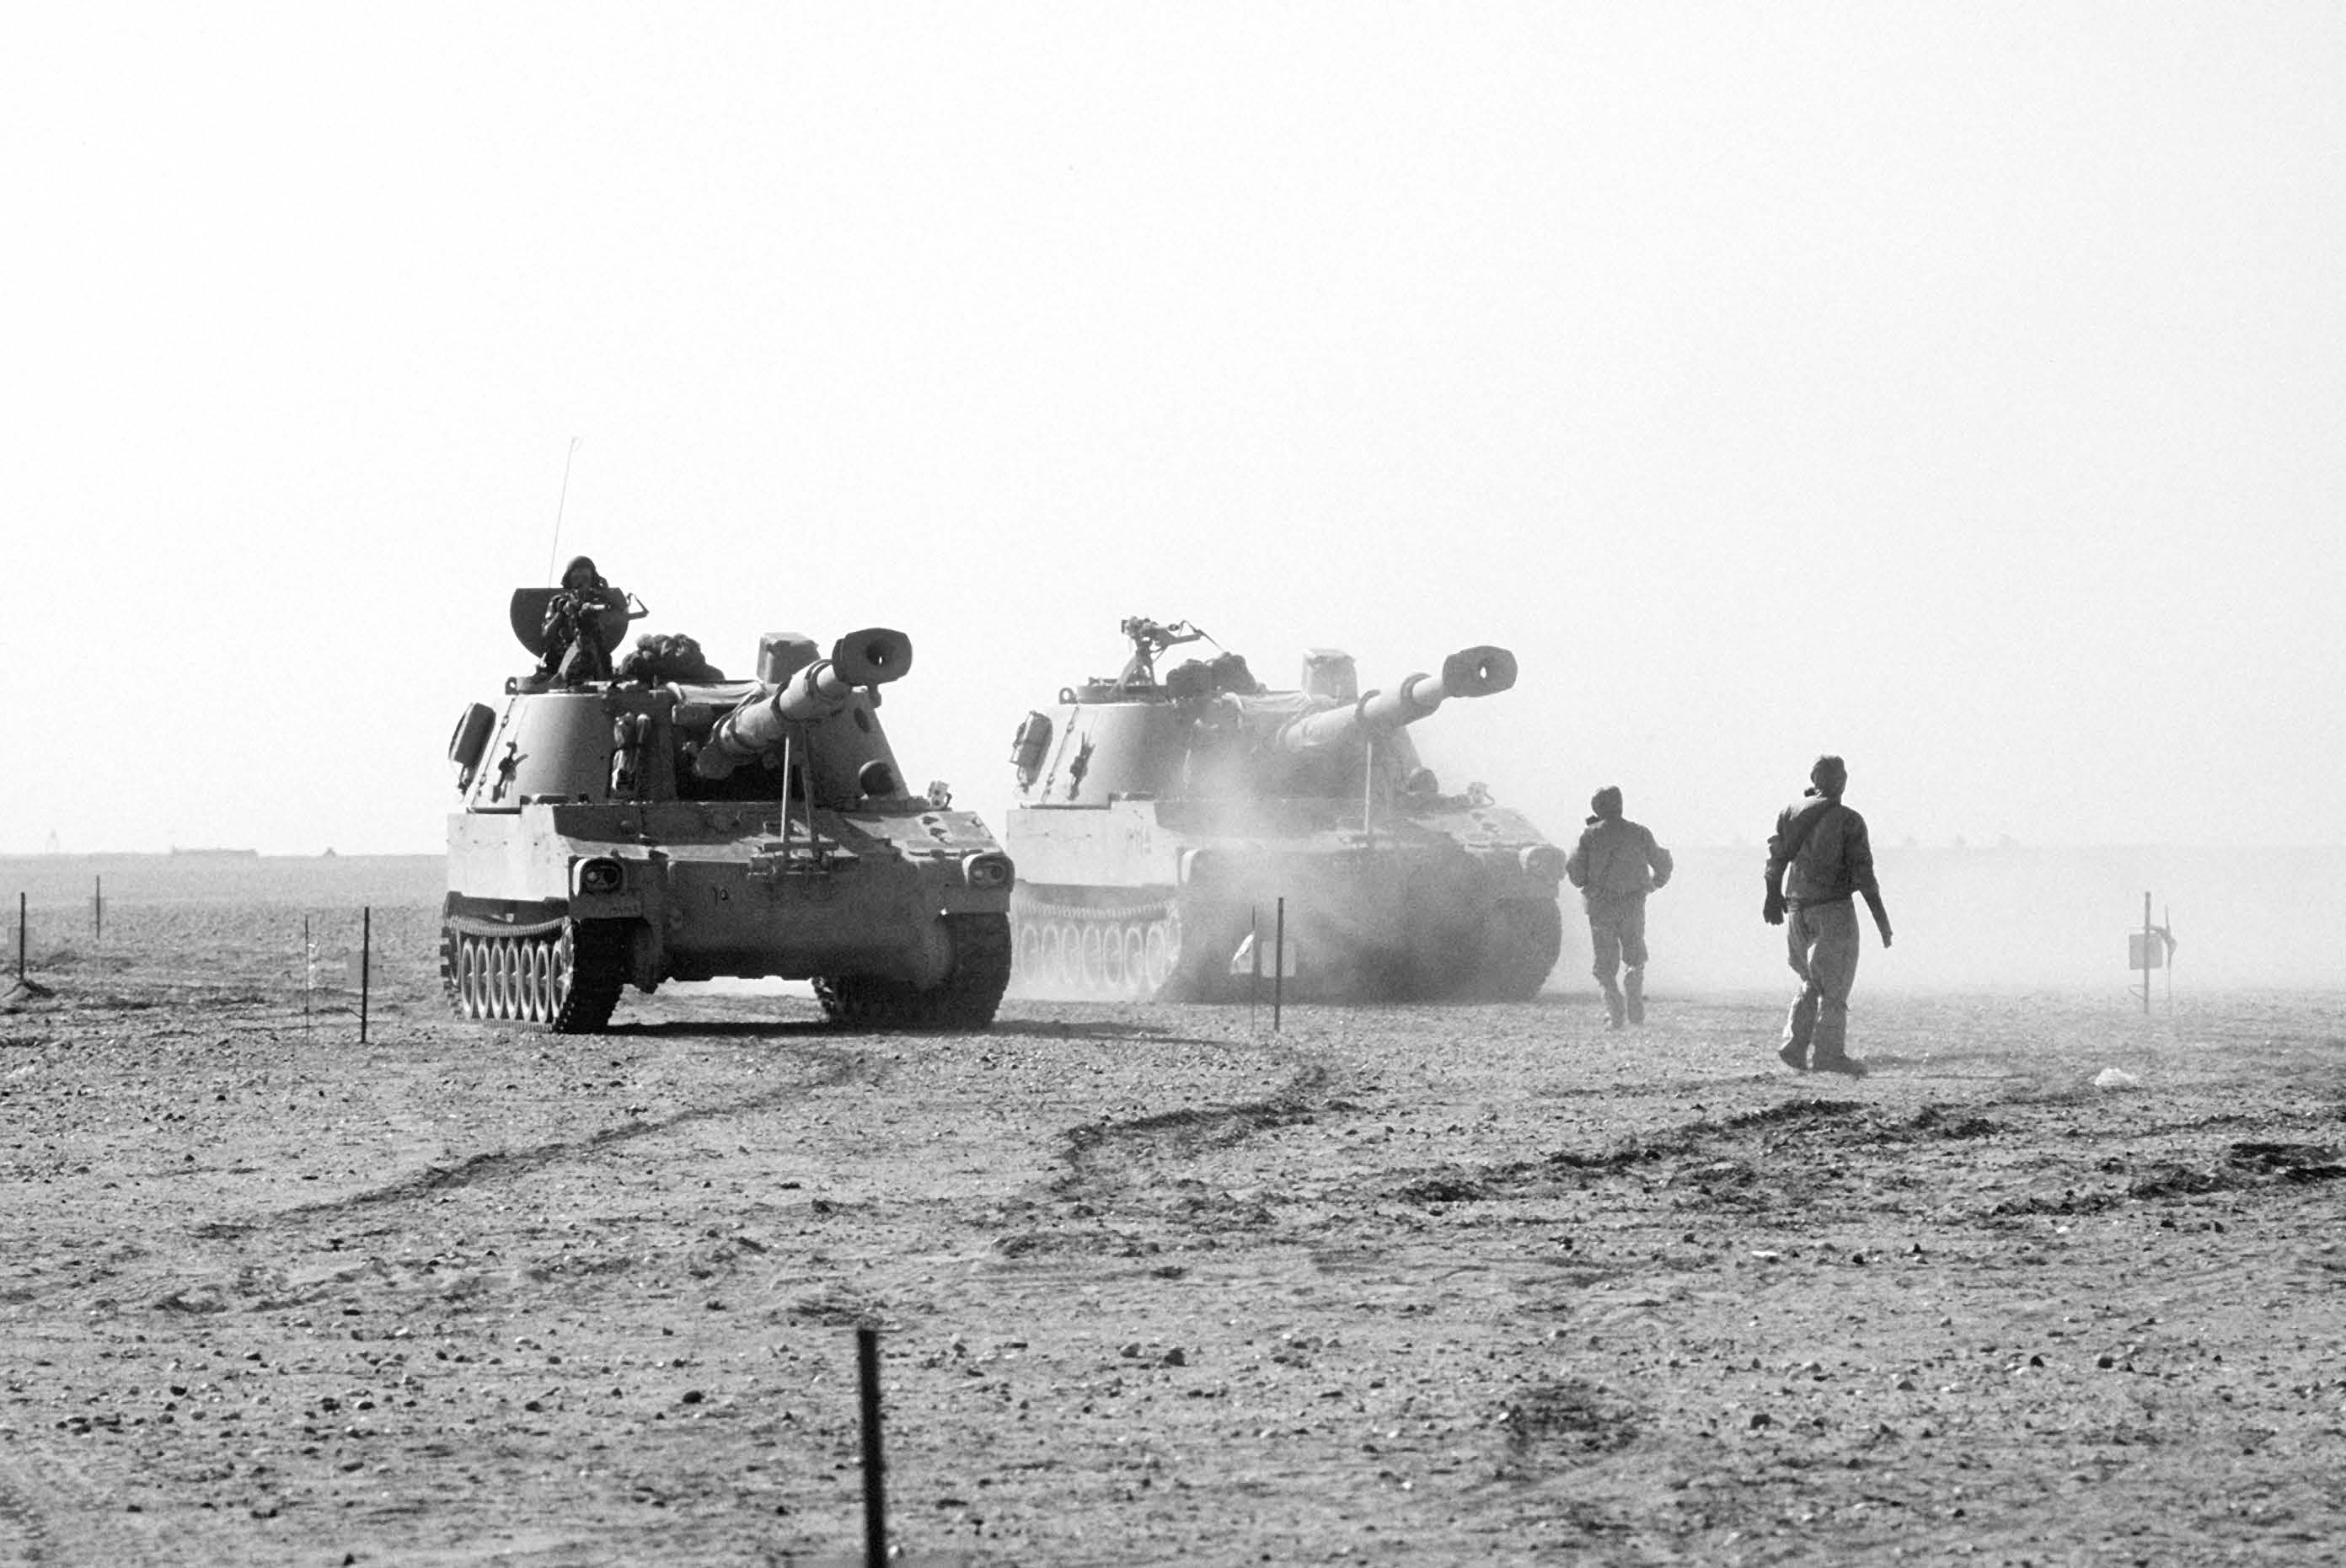 American armored vehicles move across the desert during Operation Desert Storm. Courtesy of DoD.